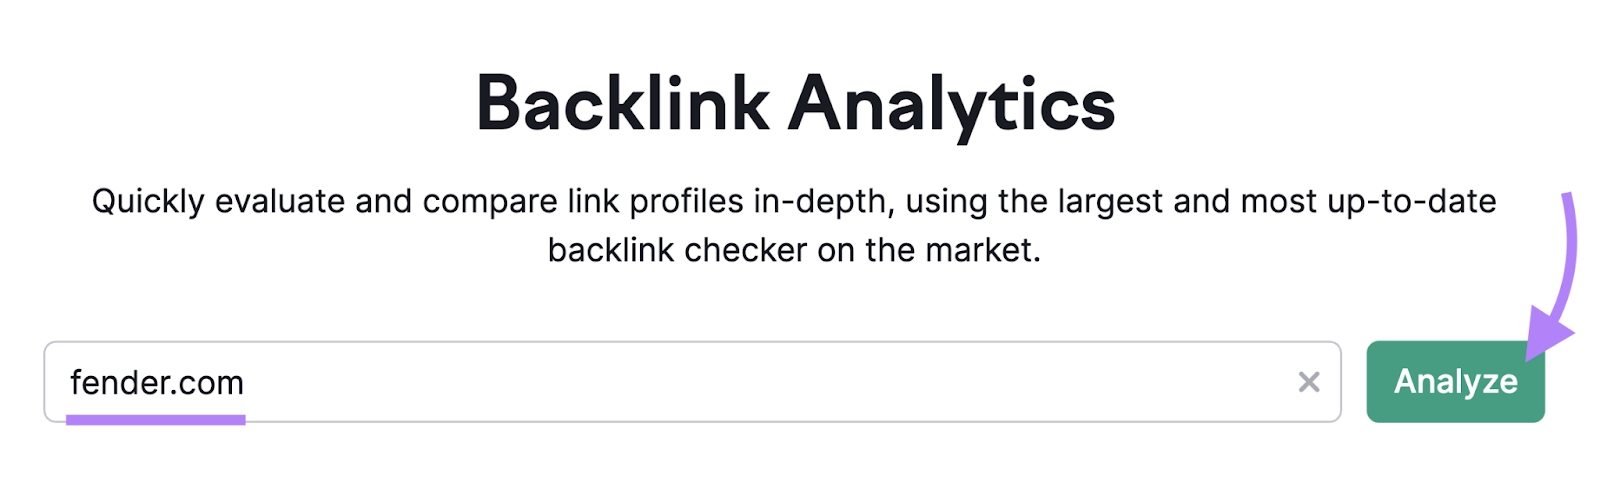 "fender.com" entered into the Backlink Analytics search bar